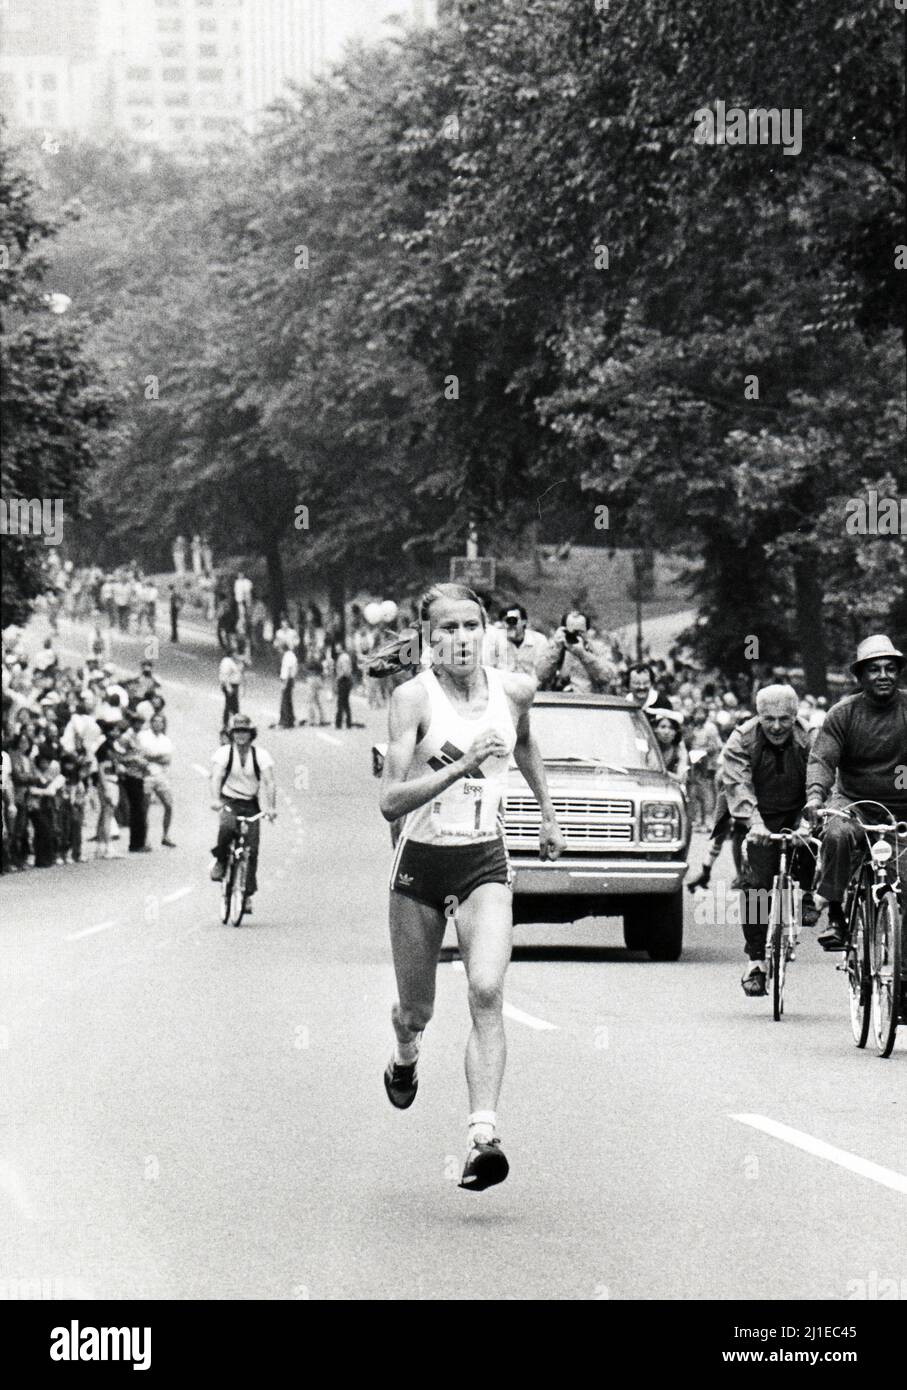 Running legend GRETE WAITZ en route to setting the world's record for 10km in a women's only race in Central Park, New York City. May, 1980. Stock Photo